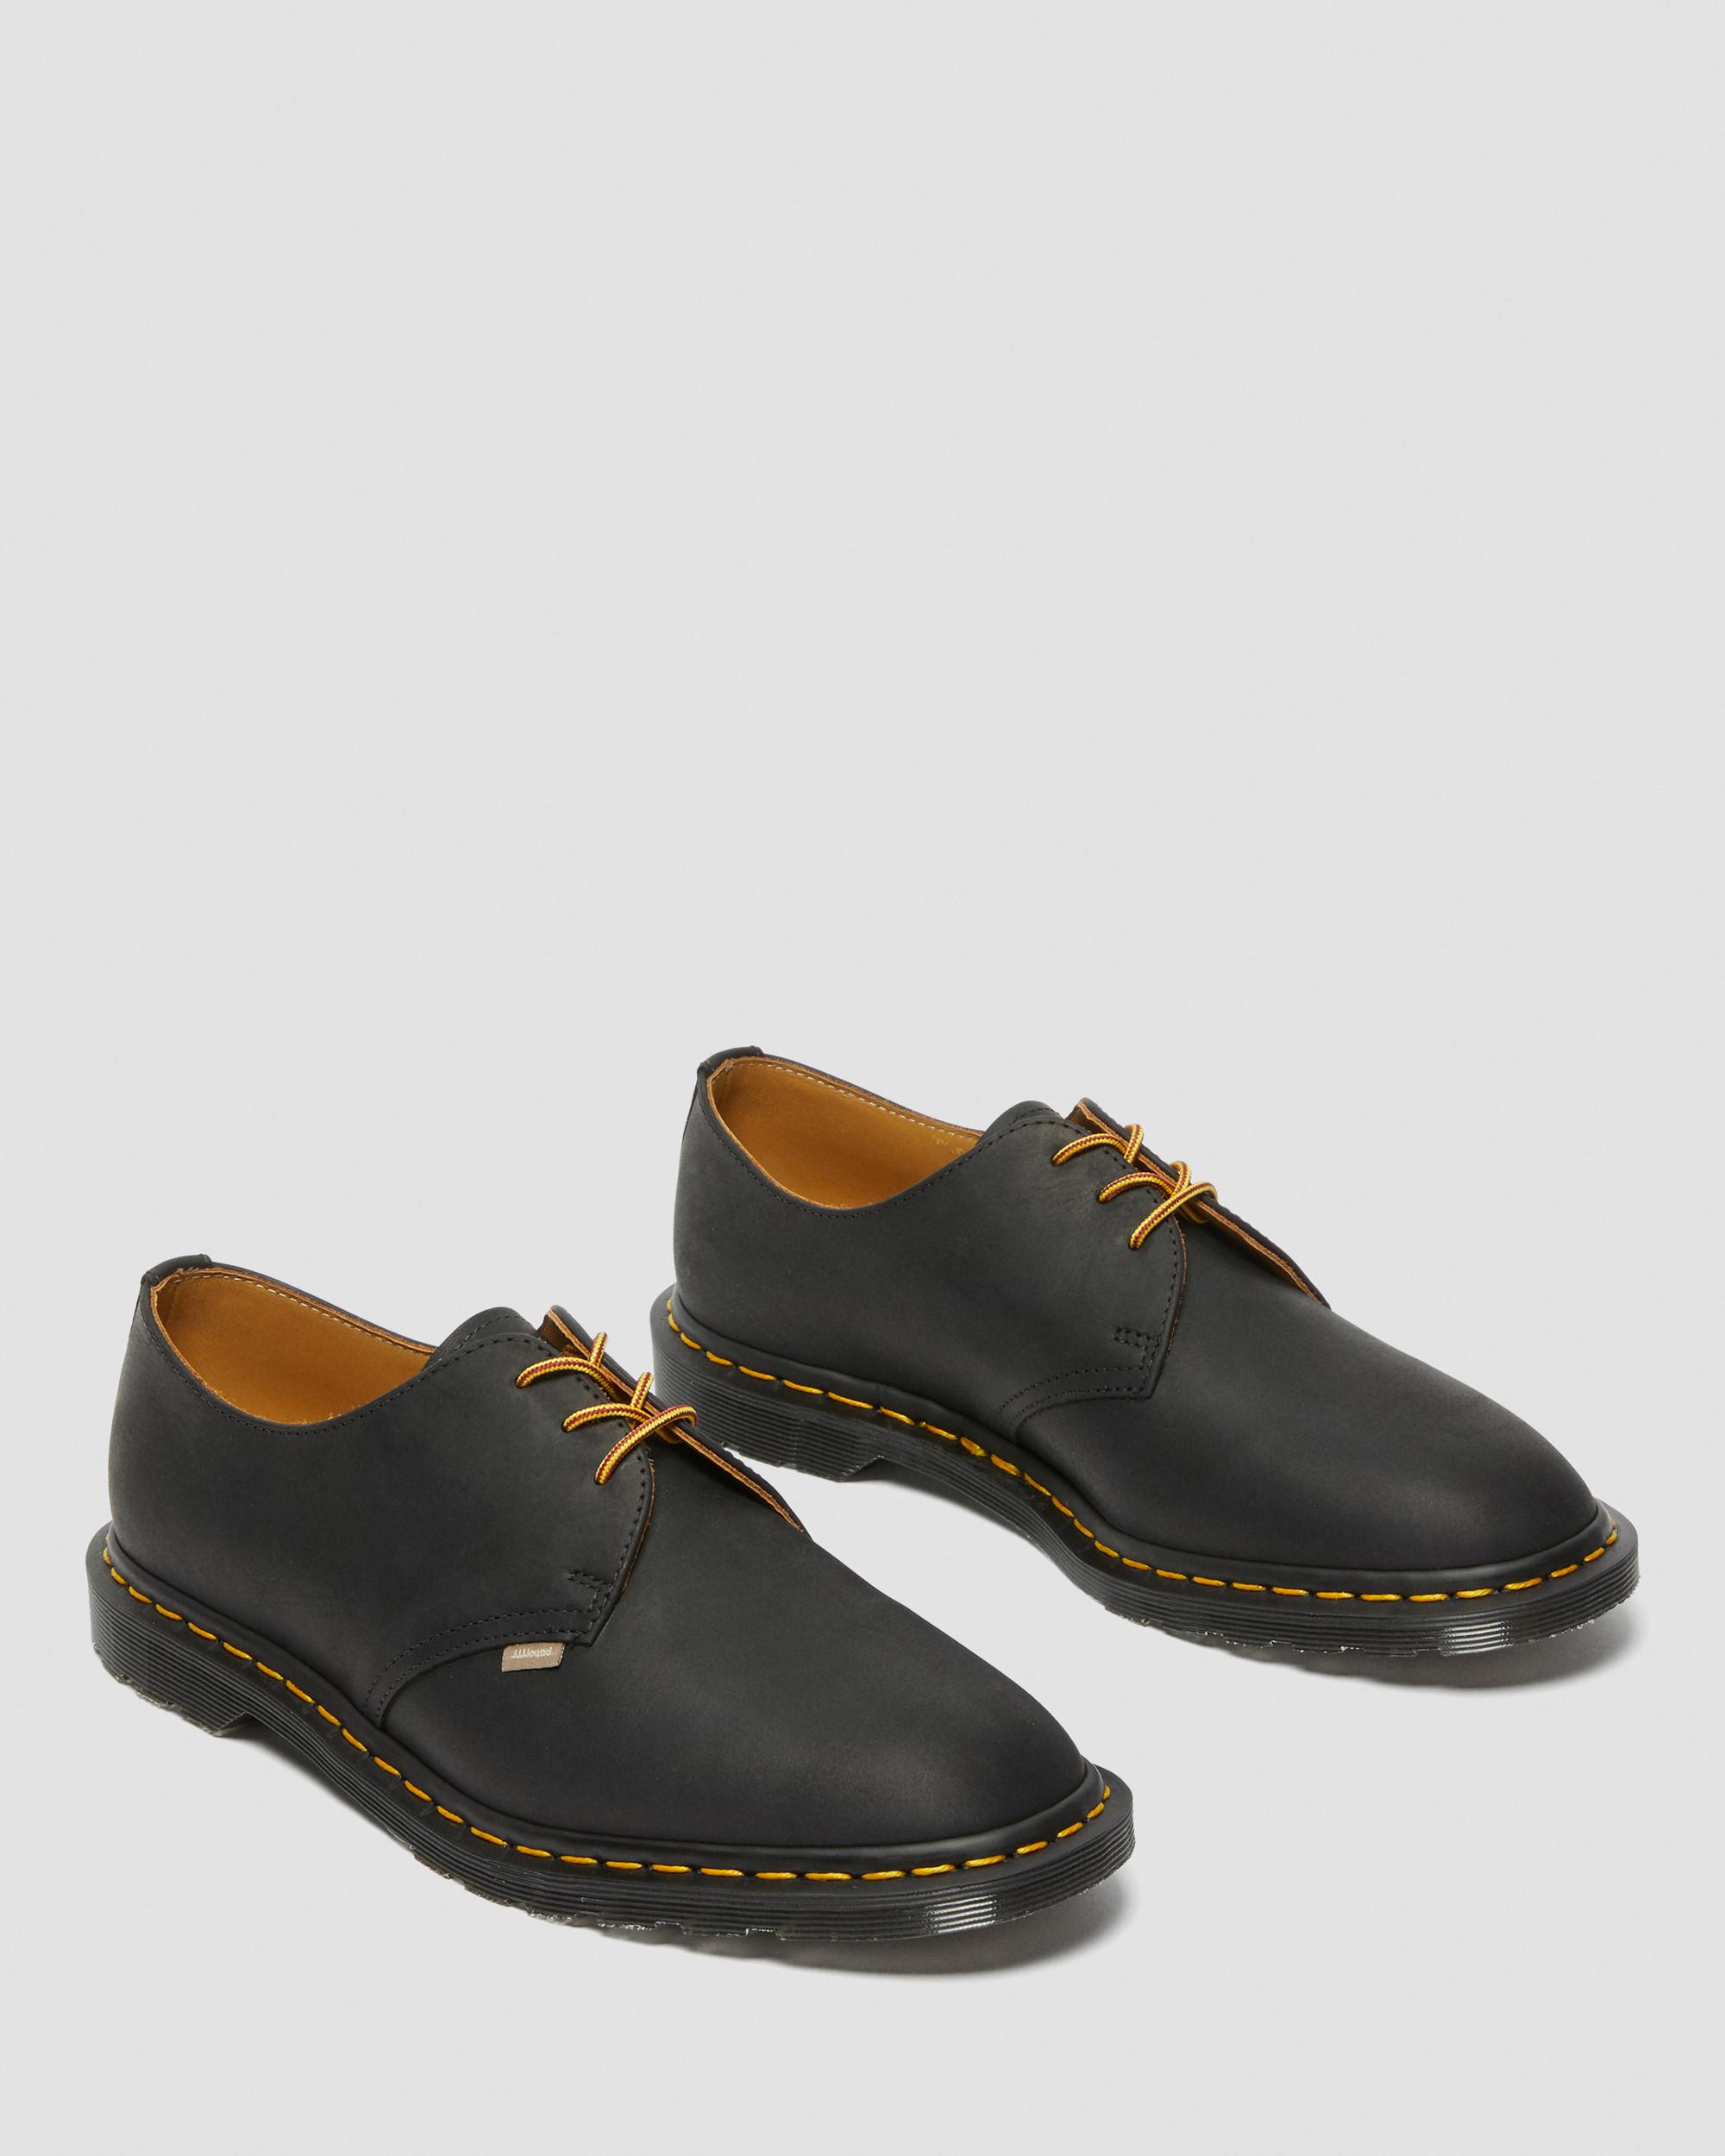 Archie II JJJJound Wyoming Leather Lace Up Shoes | Dr. Martens